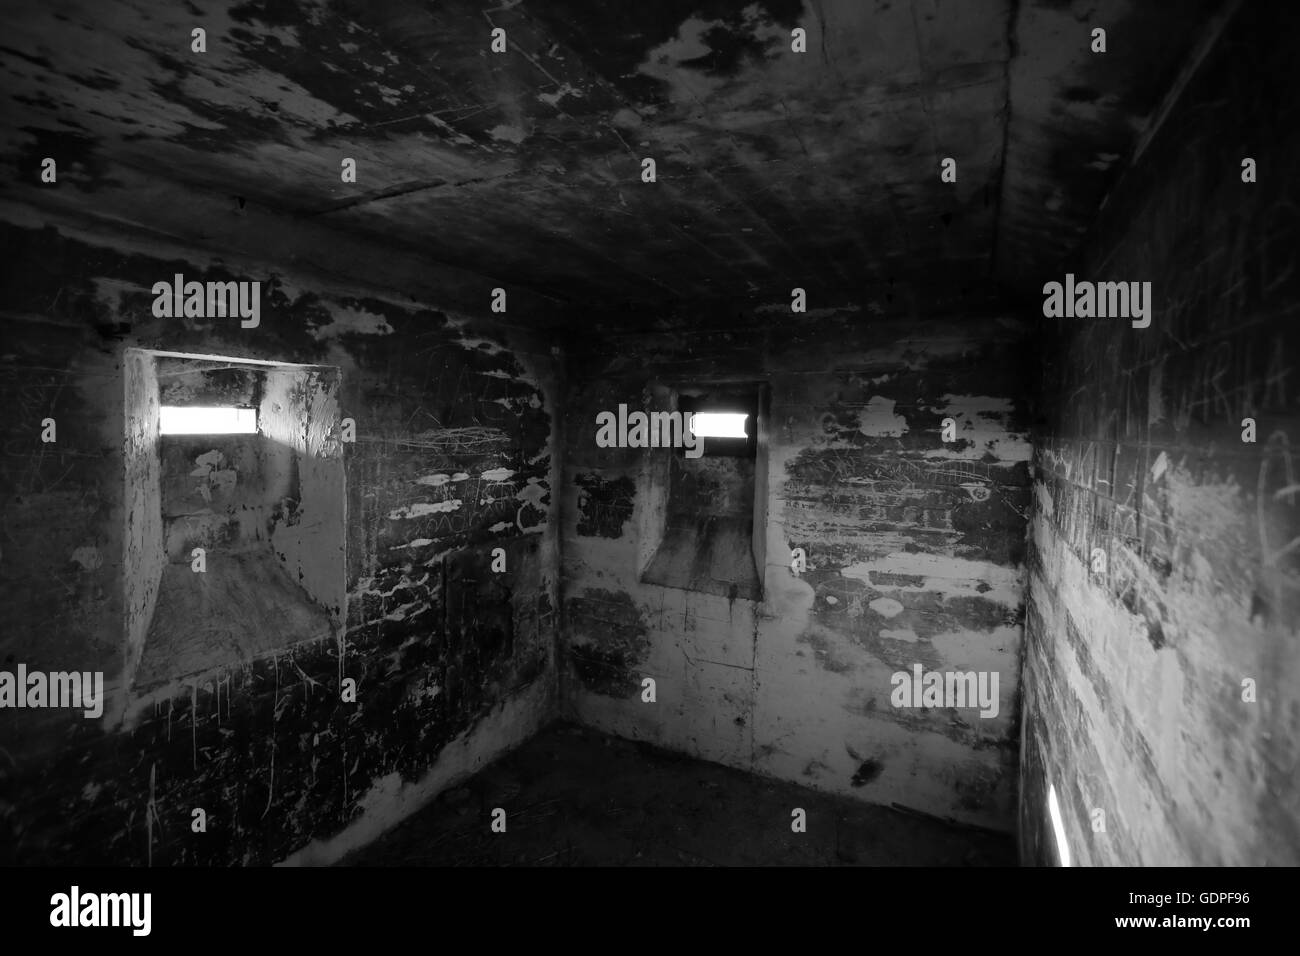 View in a small confined room in an old WWII bunker near Lostau, Saxony-Anhalt, Germany. Black and white image. Stock Photo